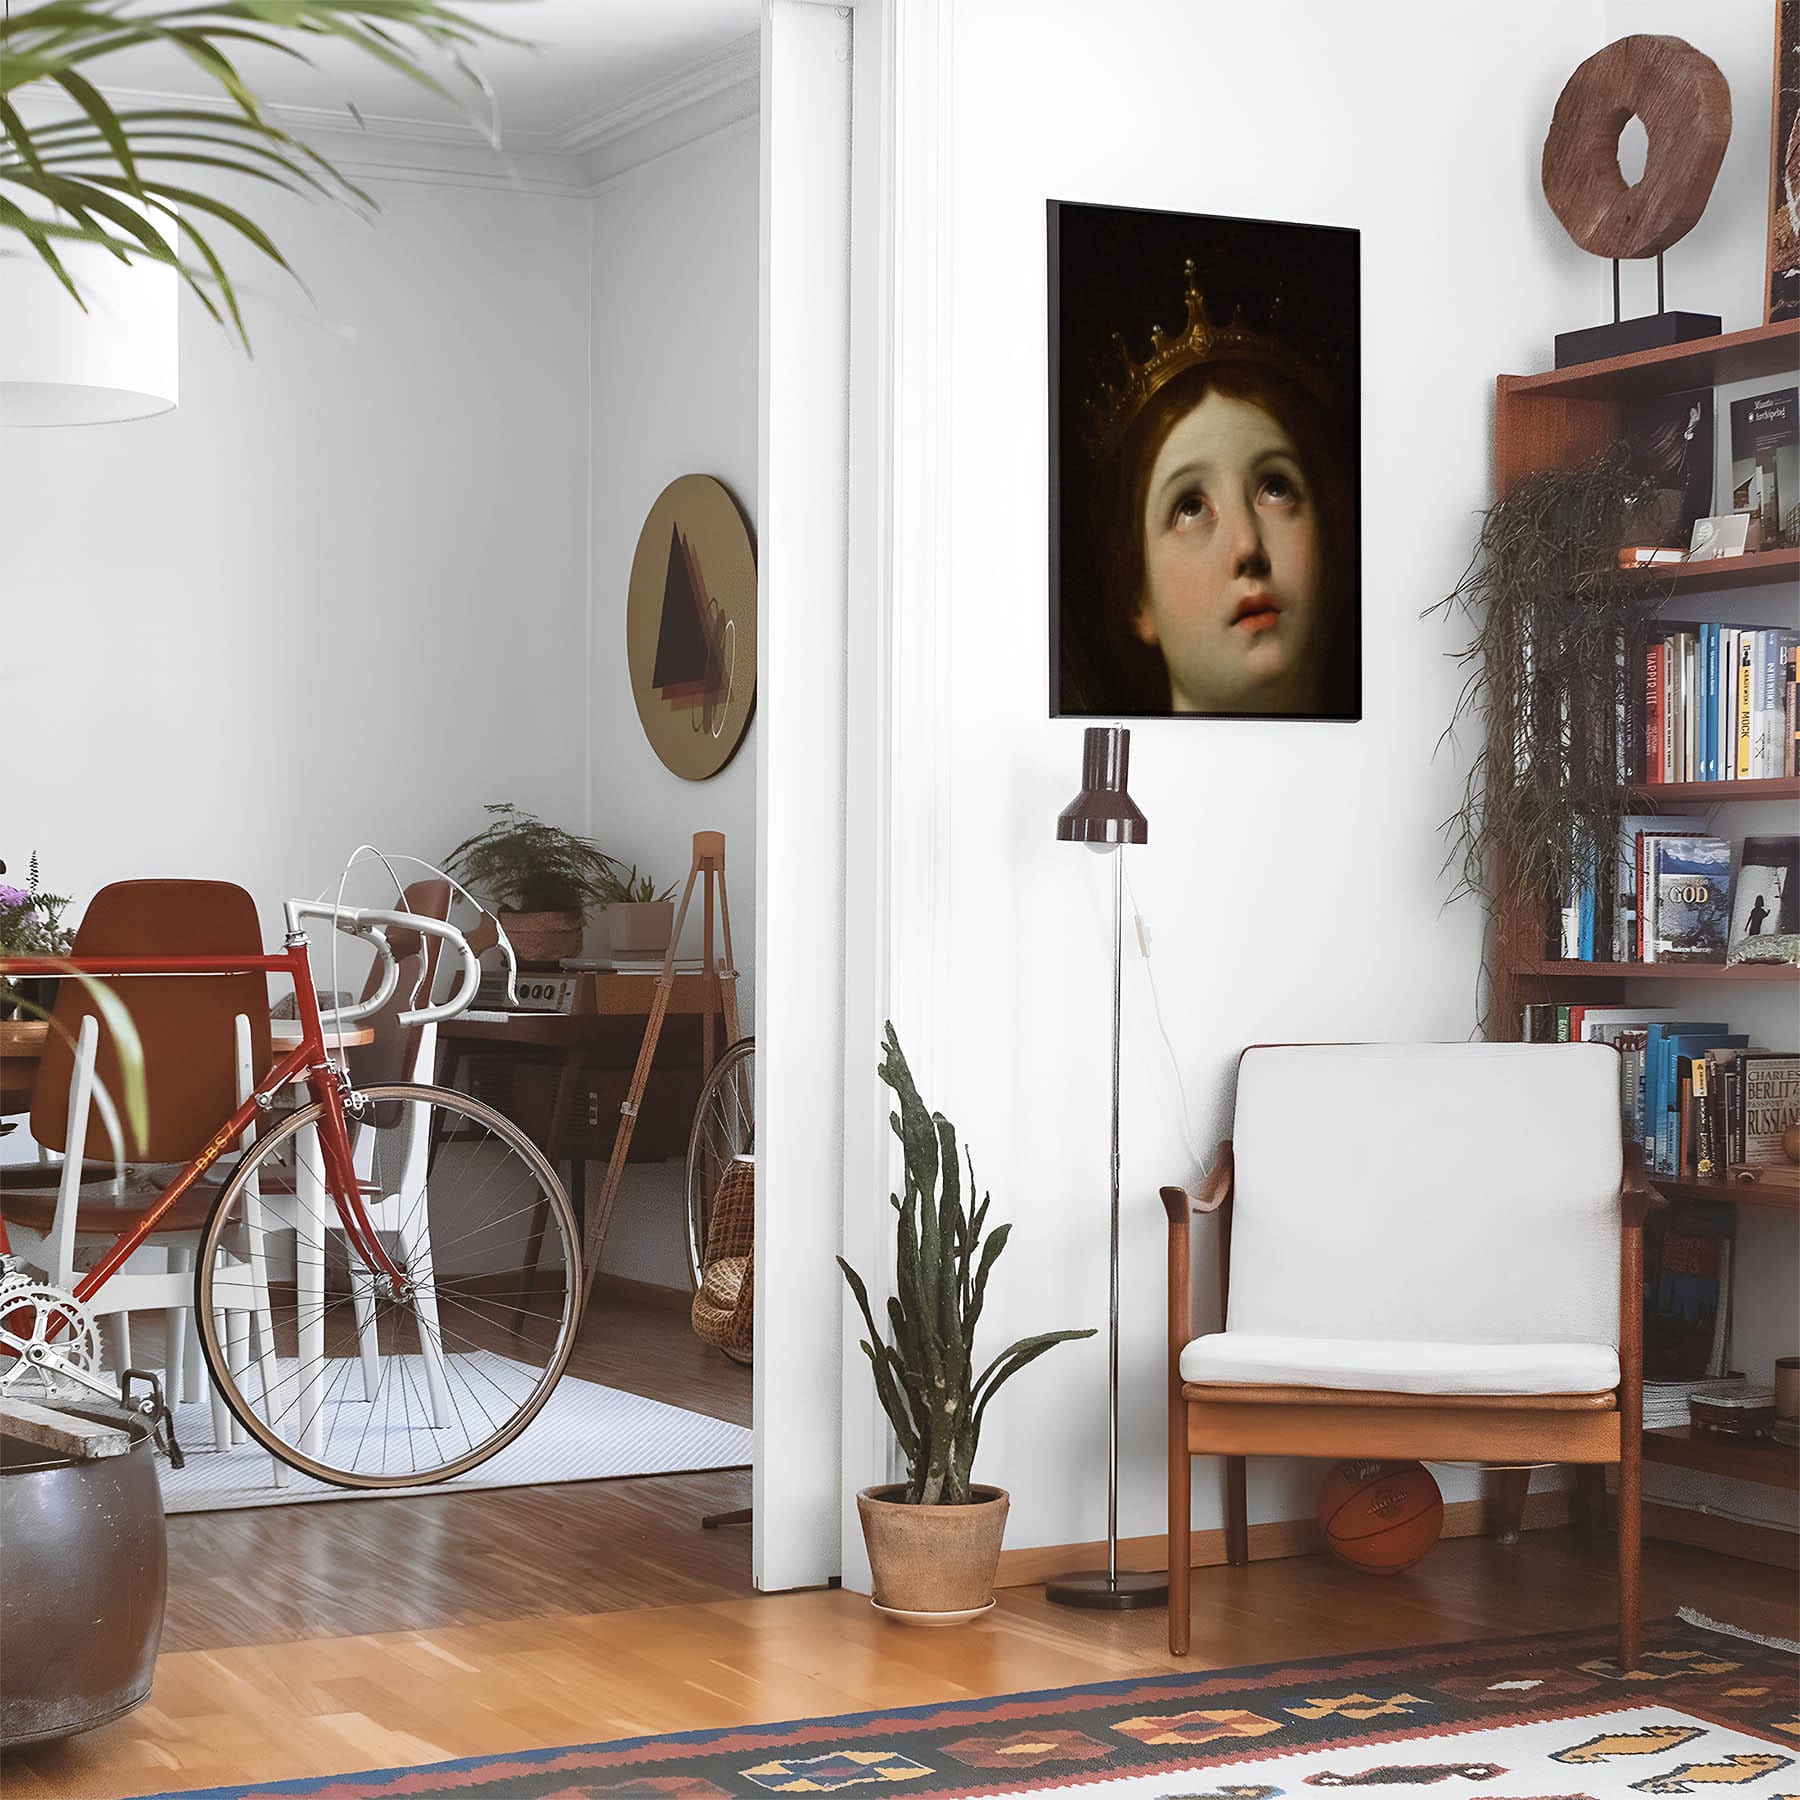 Renaissance Wall Art Print in a Picture Frame on Living Room Wall